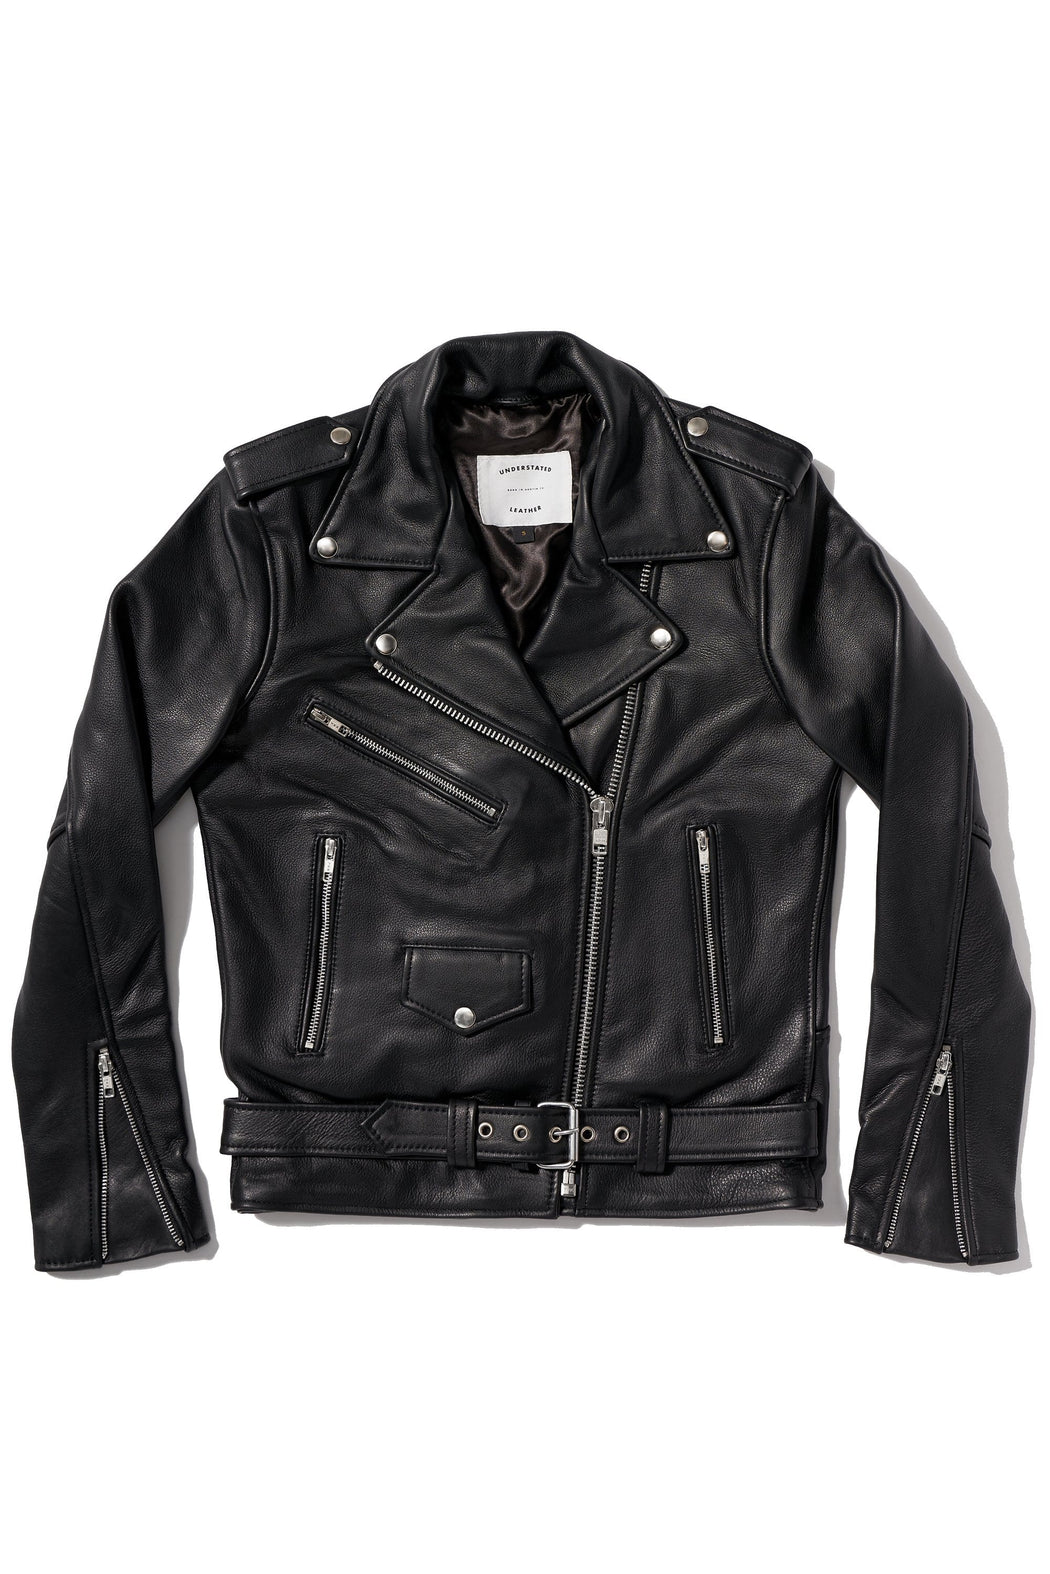 Easy Rider Jacket — Understated Leather